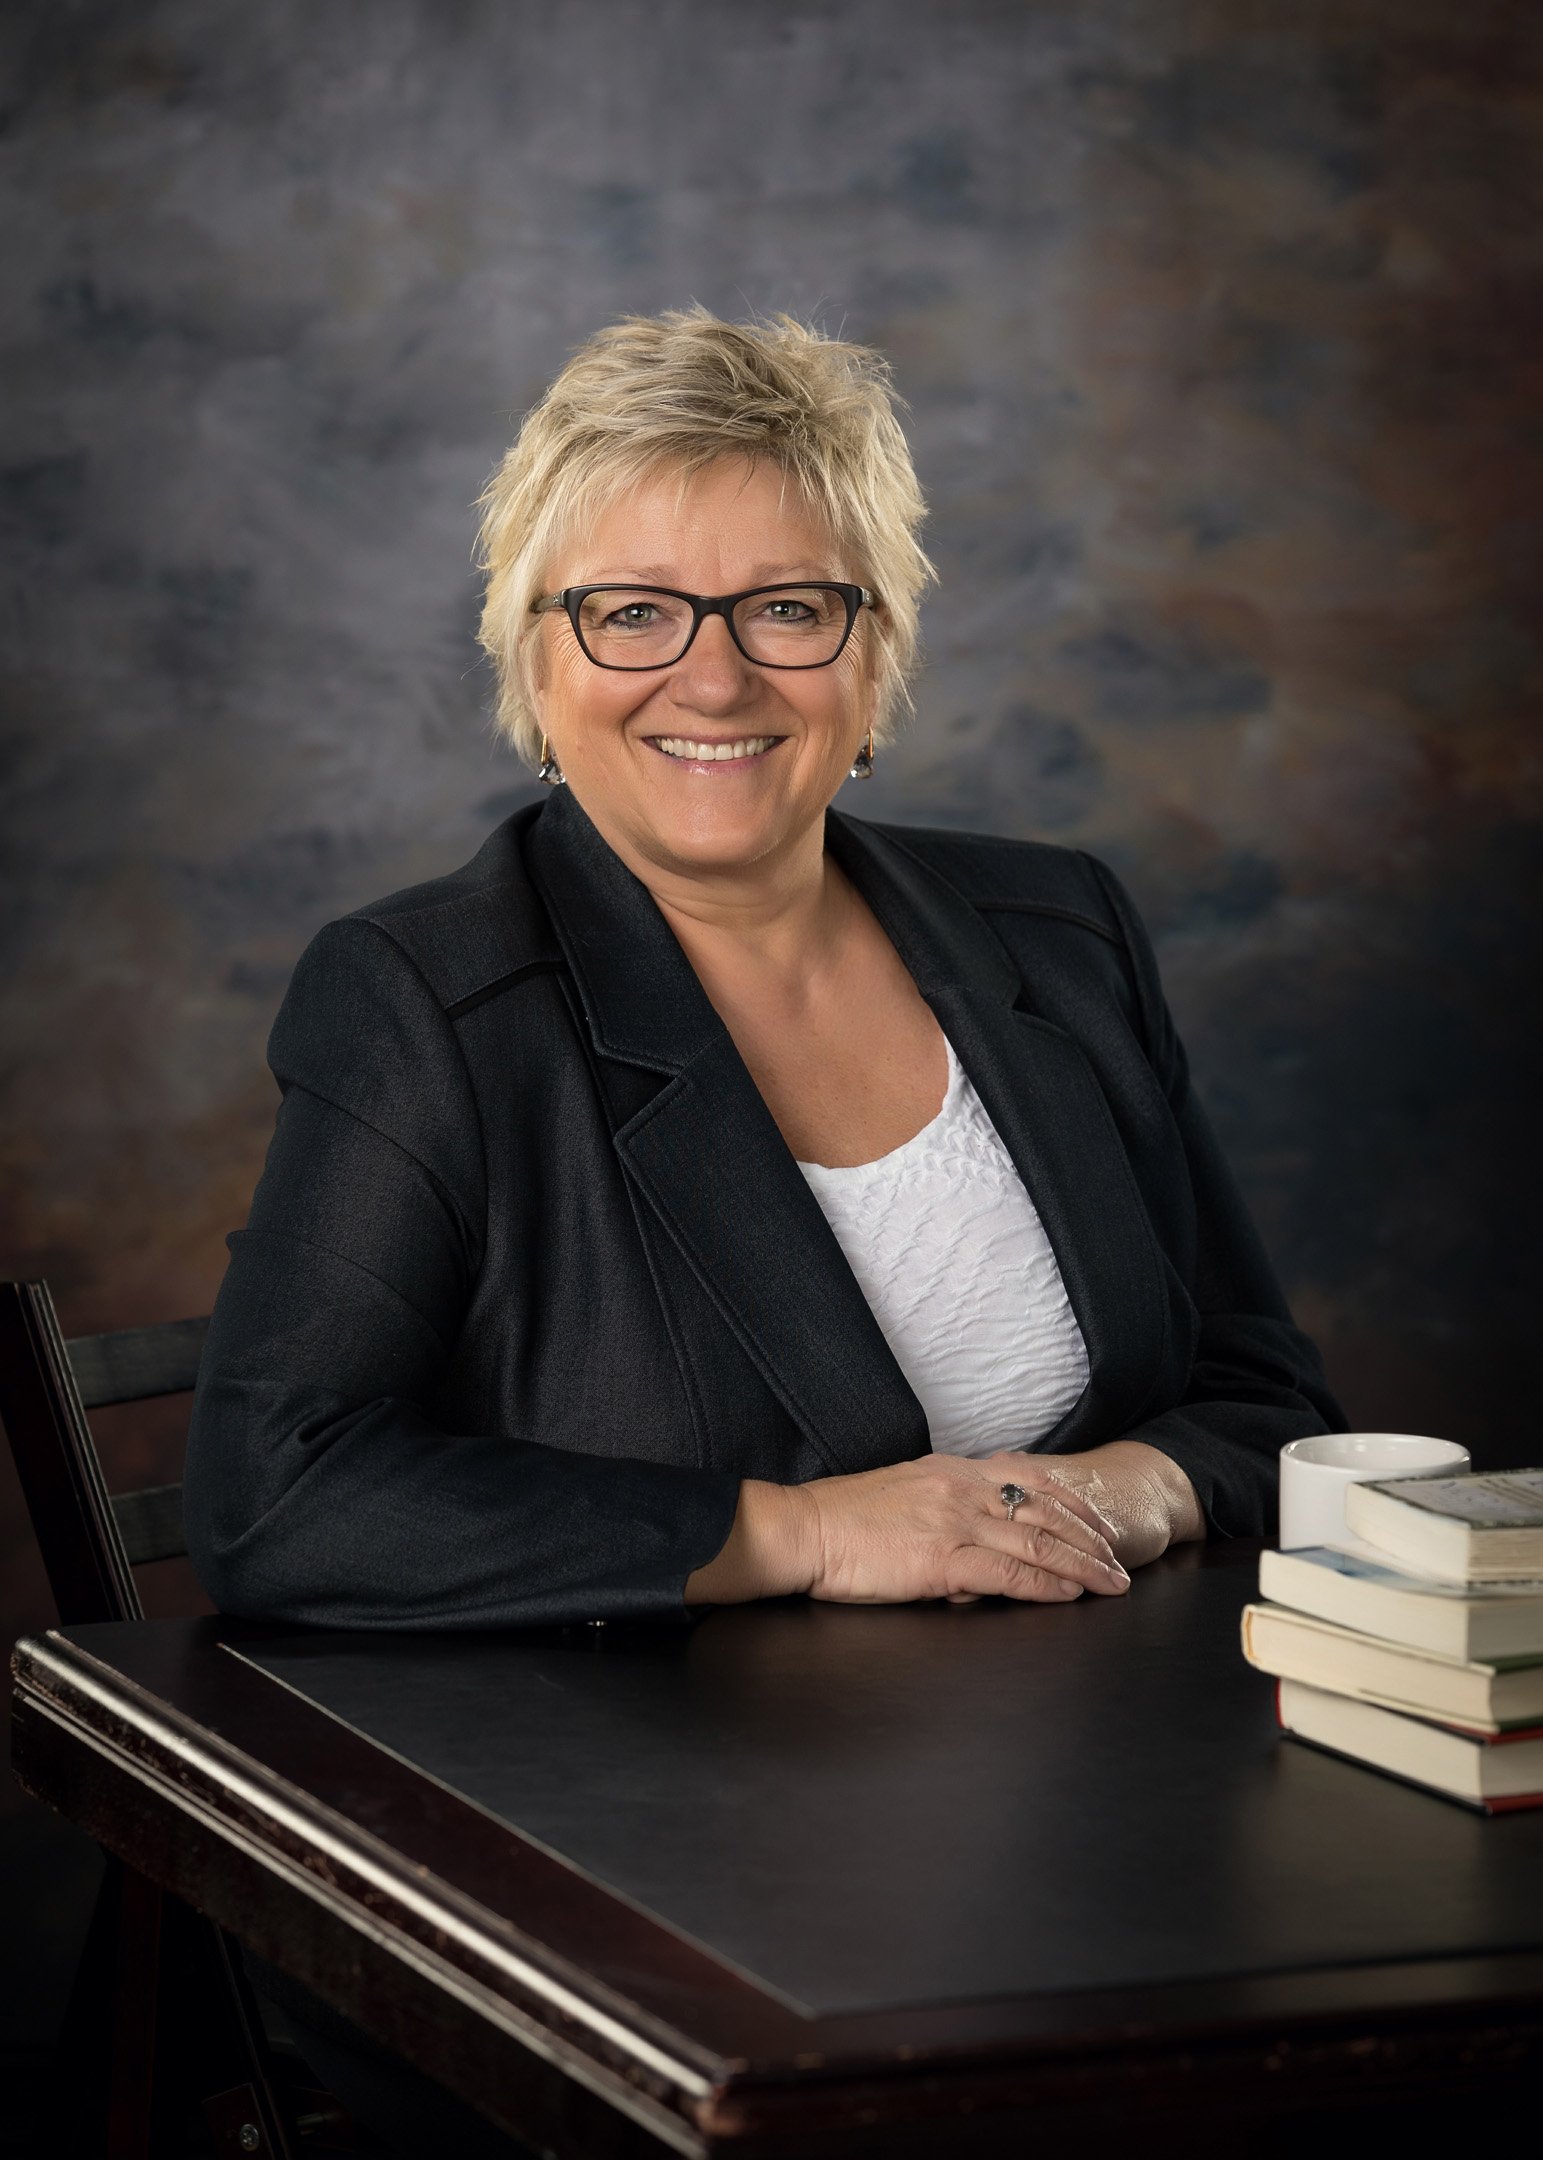 Headshot taken of woman sitting at desk in black suit with books